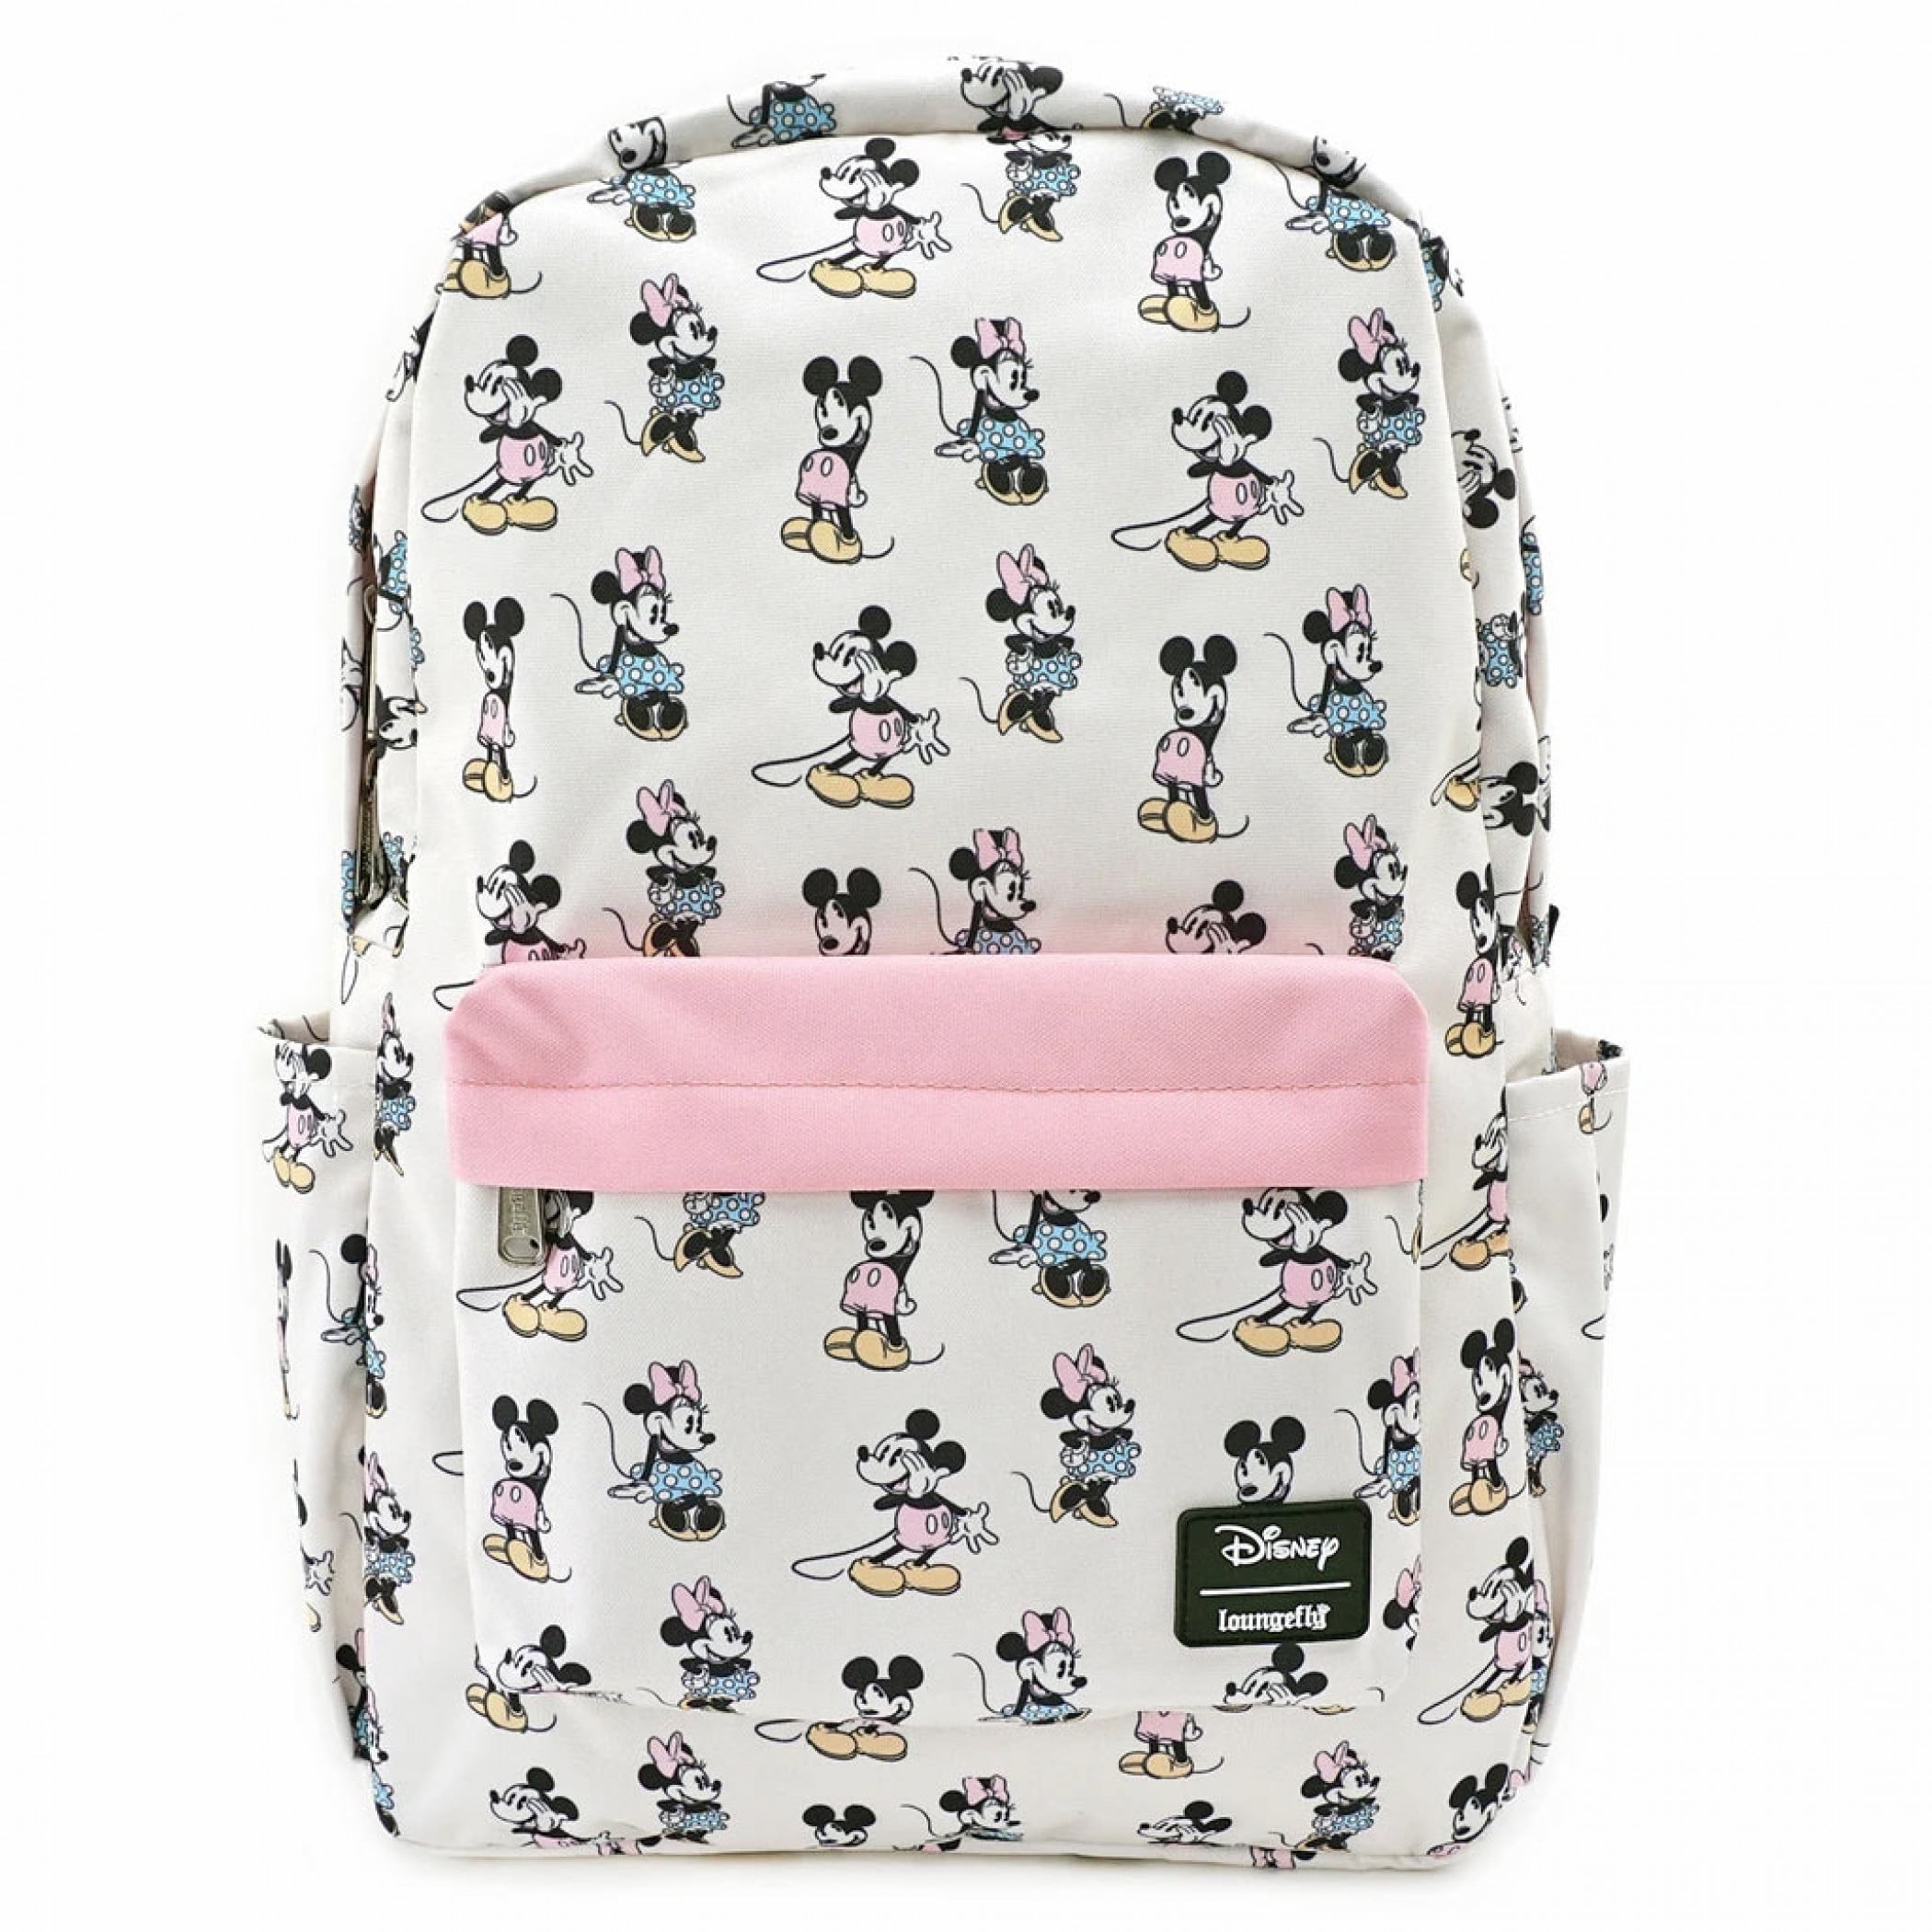 Minnie Mouse Insulated Lunch Bag Pink w/ Yellow Disney Drawstring